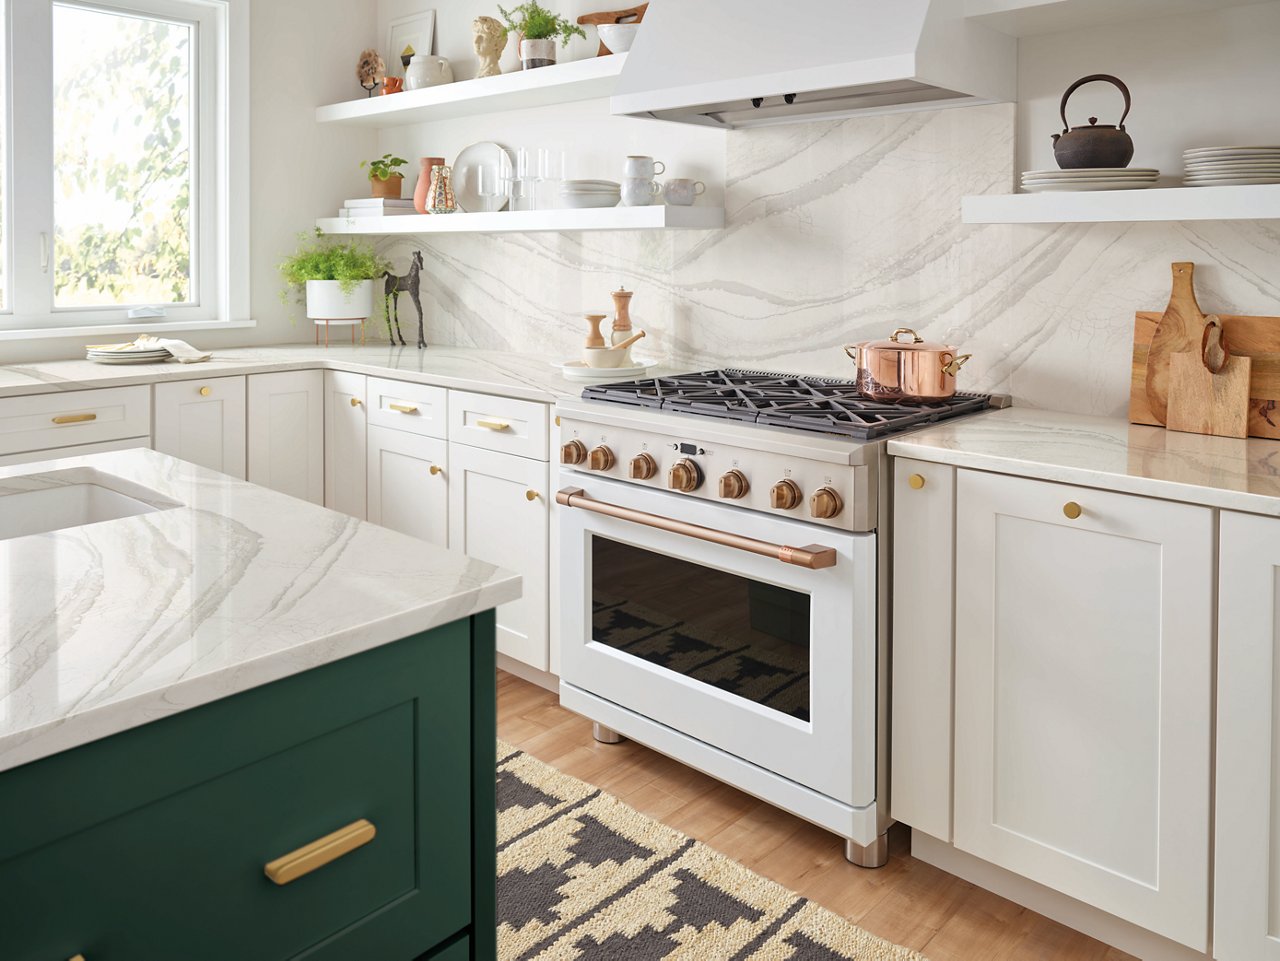 a kitchen with white cabinets, white quartz countertops and backsplash, white hood and range, open shelving, and a green island.